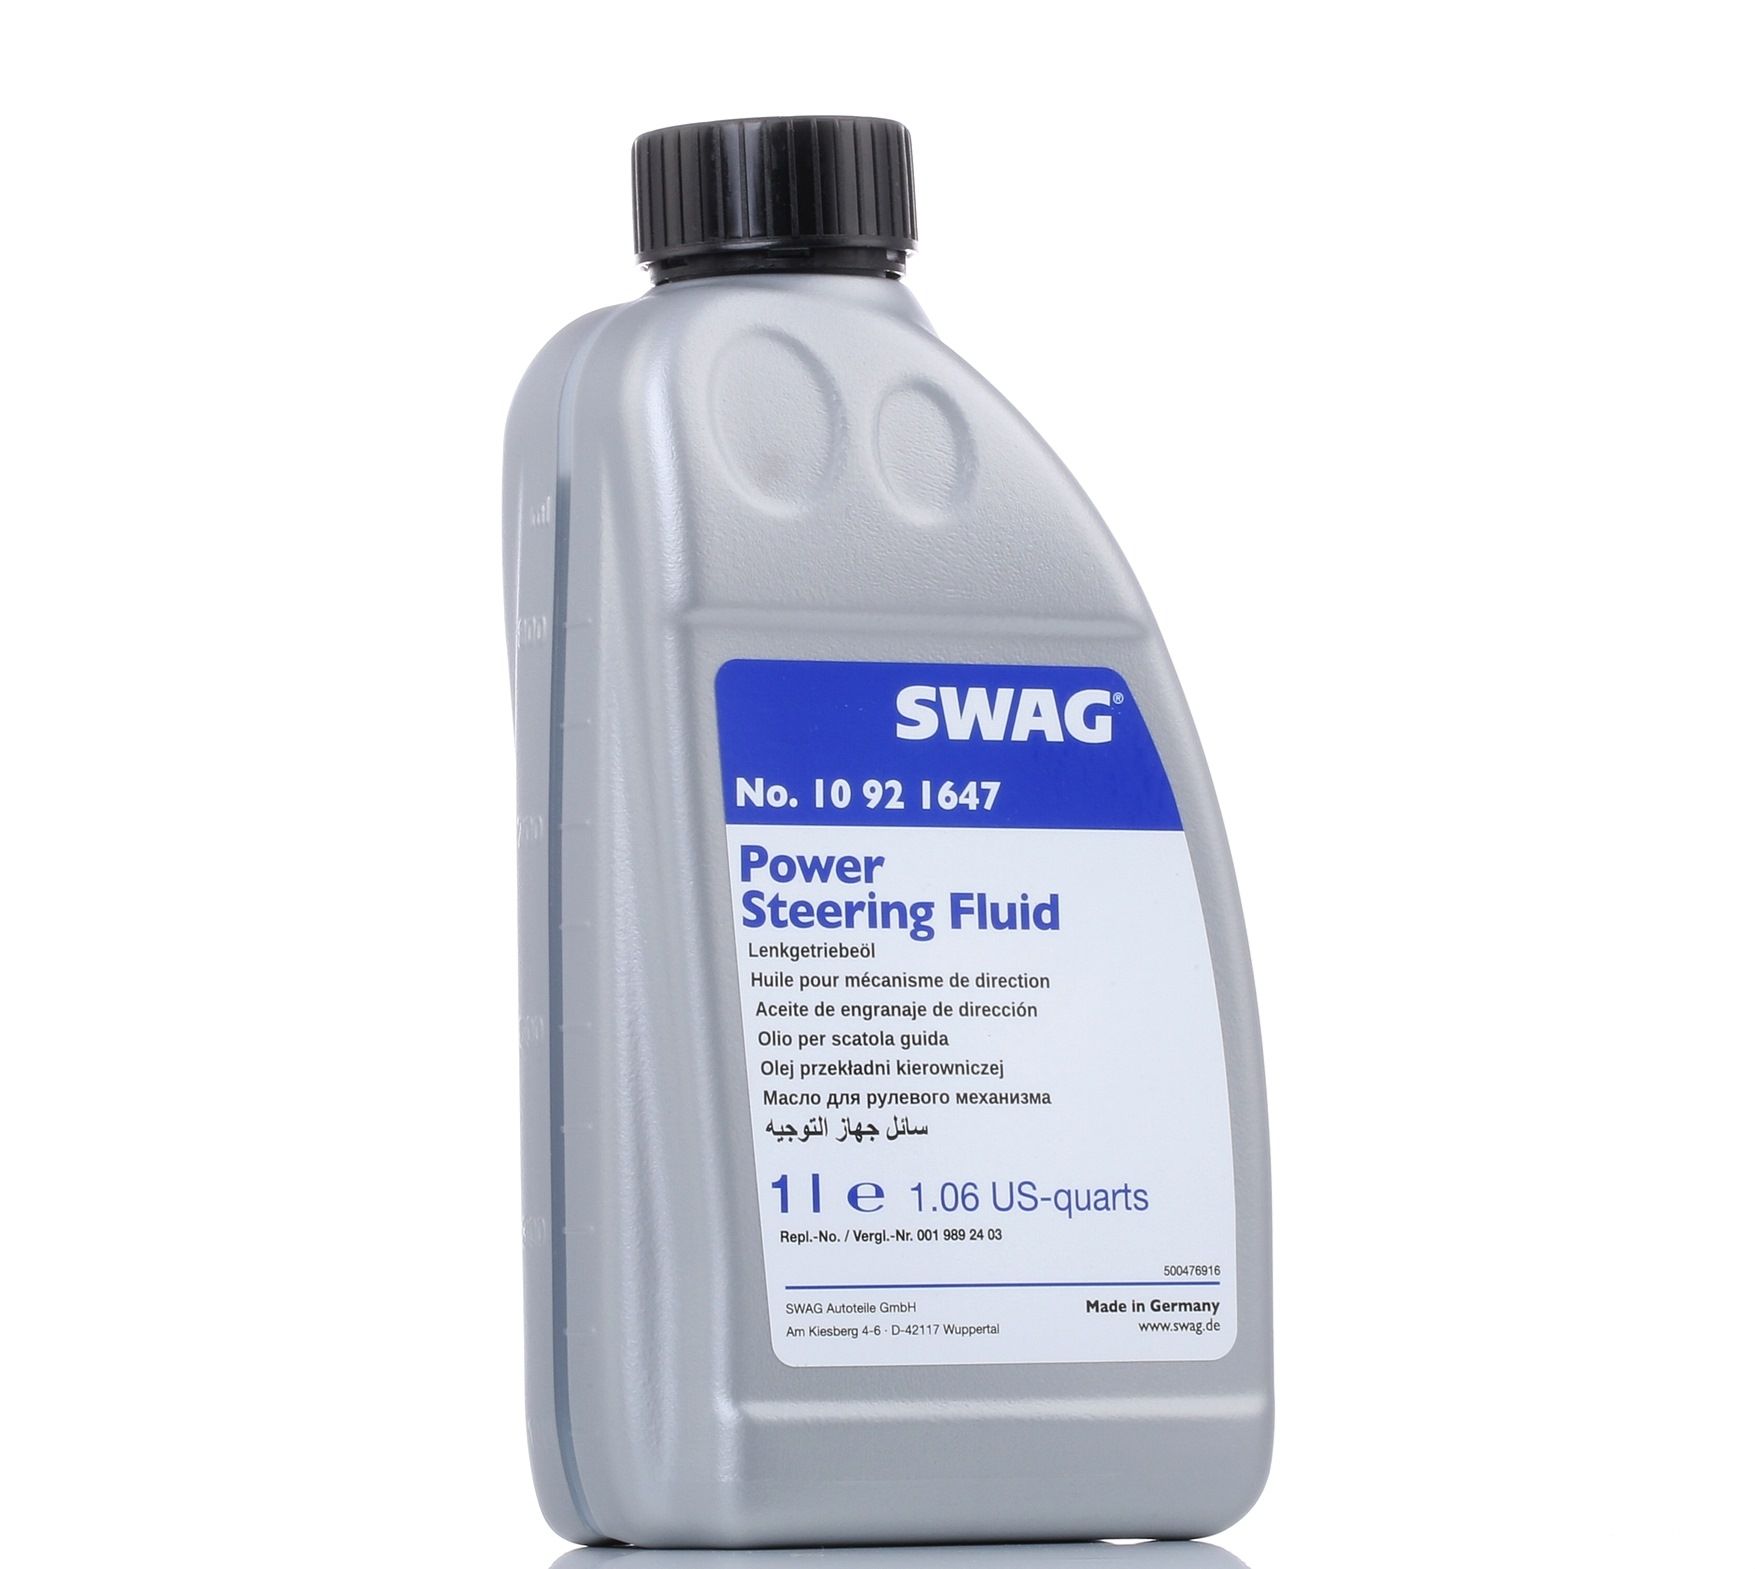 Great value for money - SWAG Hydraulic Oil 10 92 1647